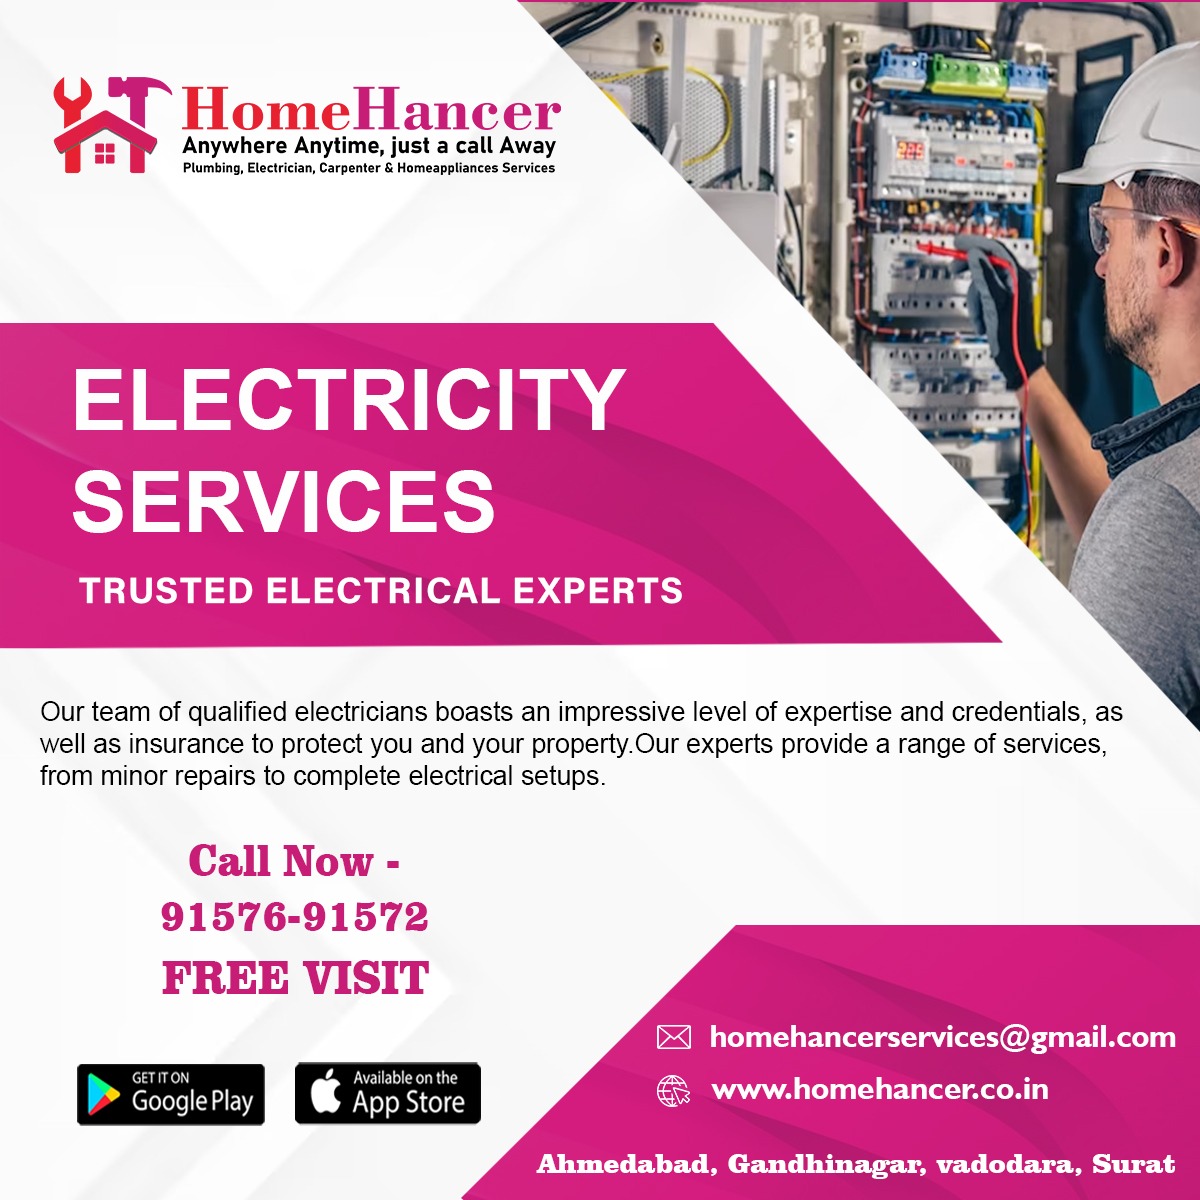 Our dedicated team of electricians is here to power up your space with precision and care. Don't let flickering lights or faulty wiring dim your day – trust Home Hancer for prompt, professional service! #HomeHancer #ElectricalExperts'